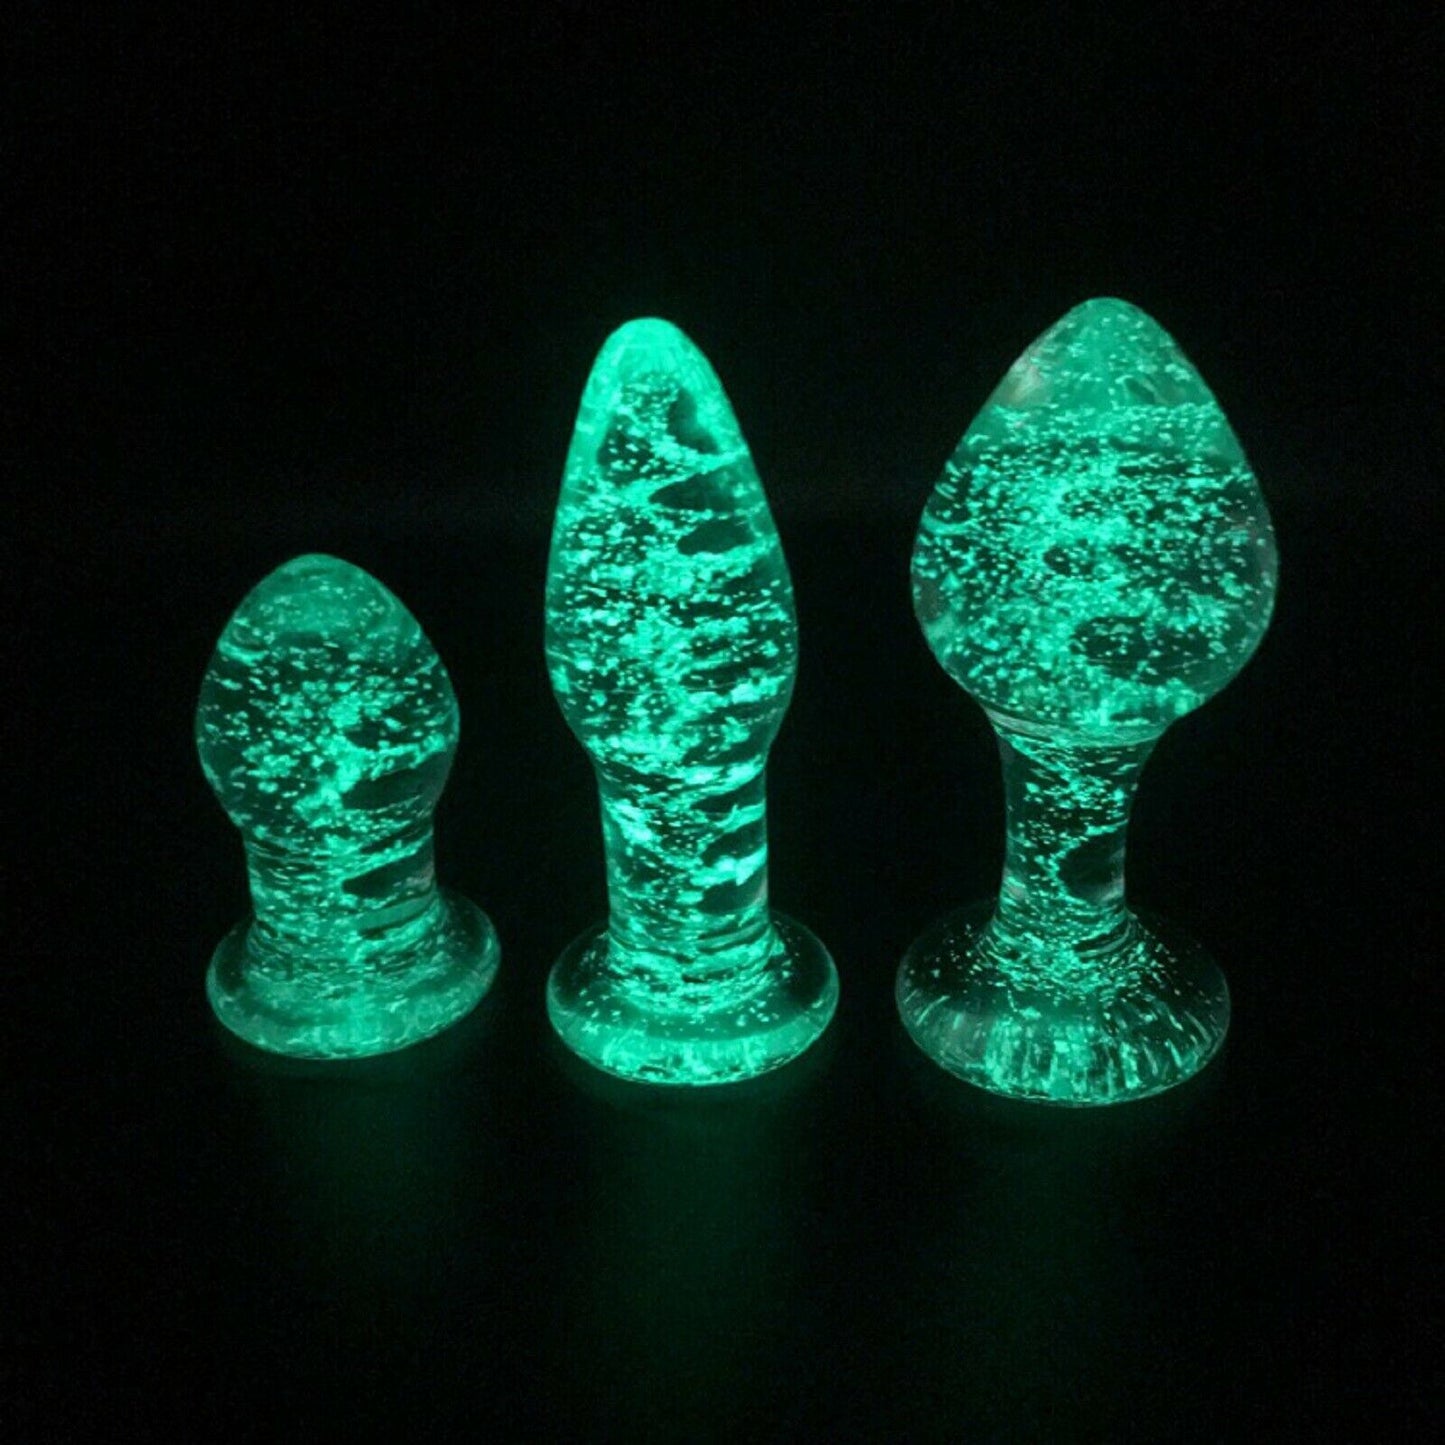 Glass Anal Butt Plug Anal Beads Trainer Dildo Glow in the Dark Adult Sex Toy New